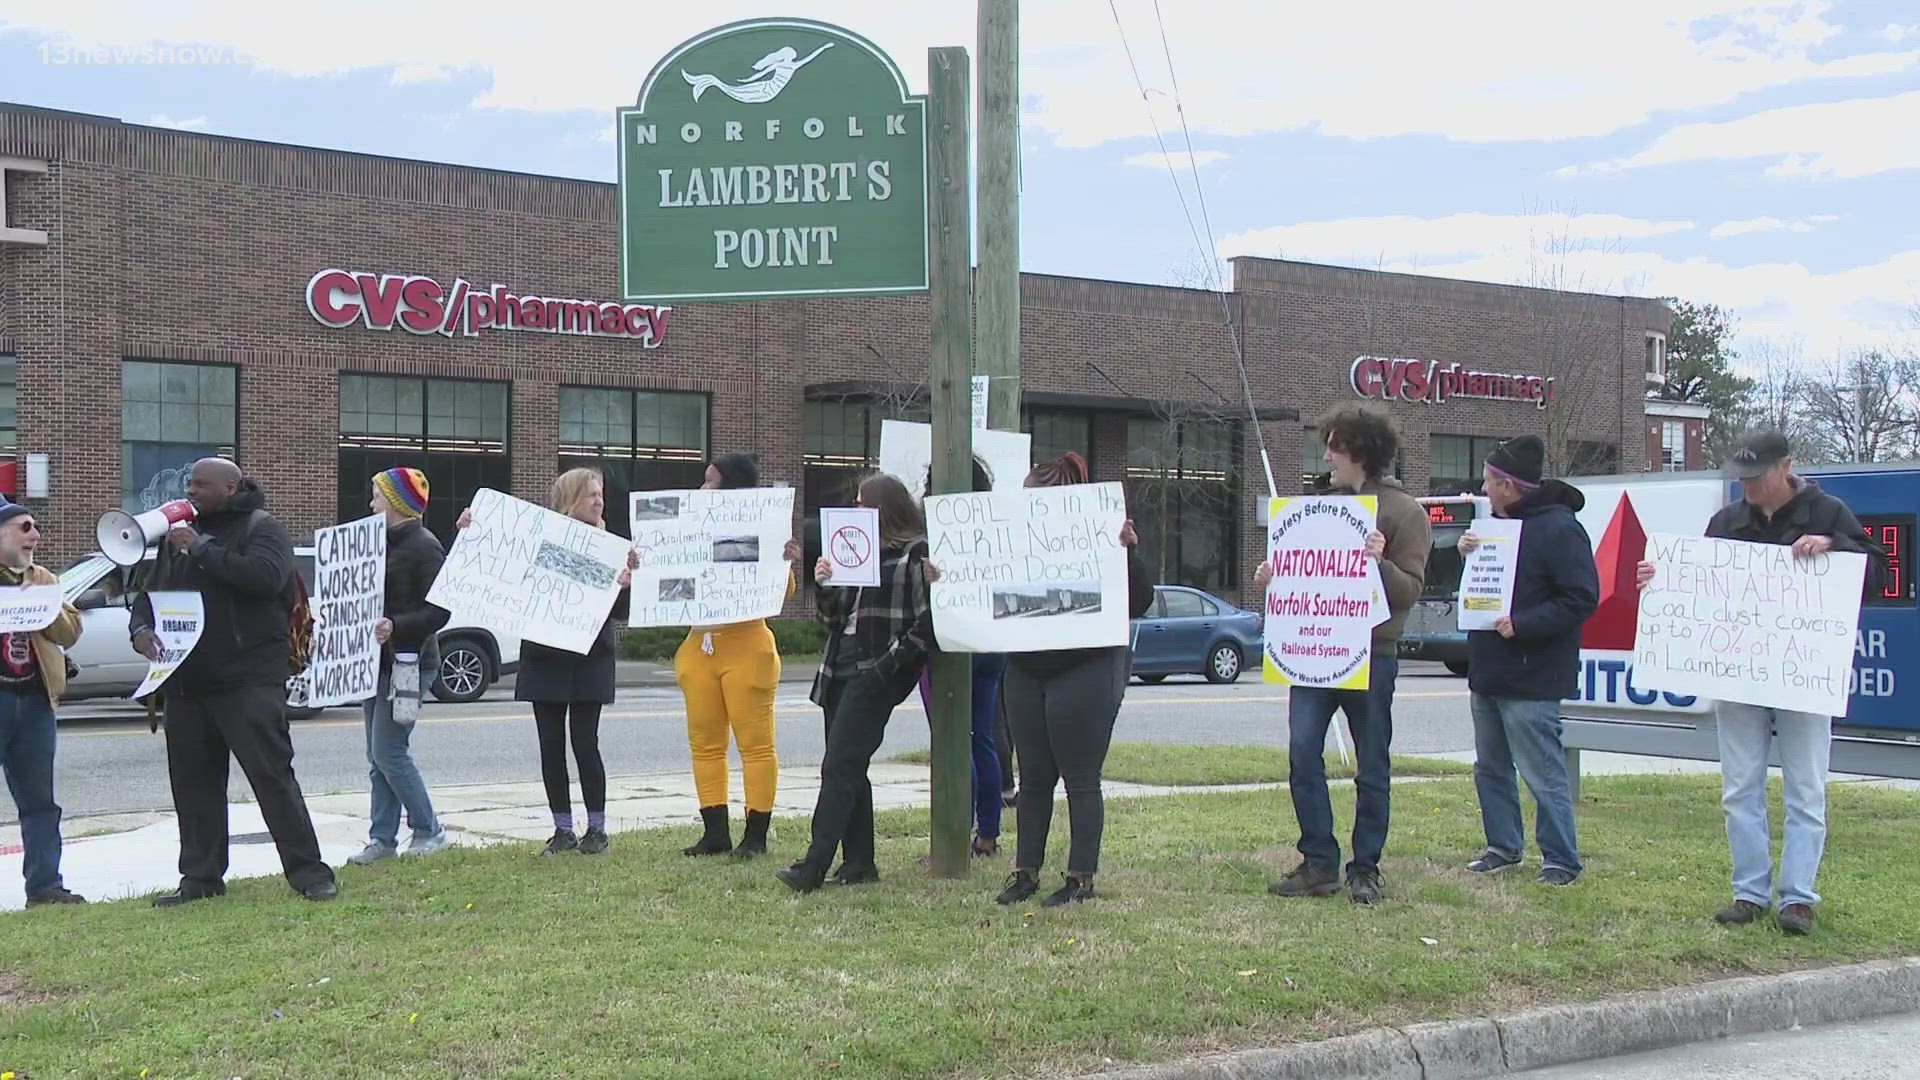 Protestors said the train derailment in East Palestine prompted them to spotlight their own community in Lambert’s Point.